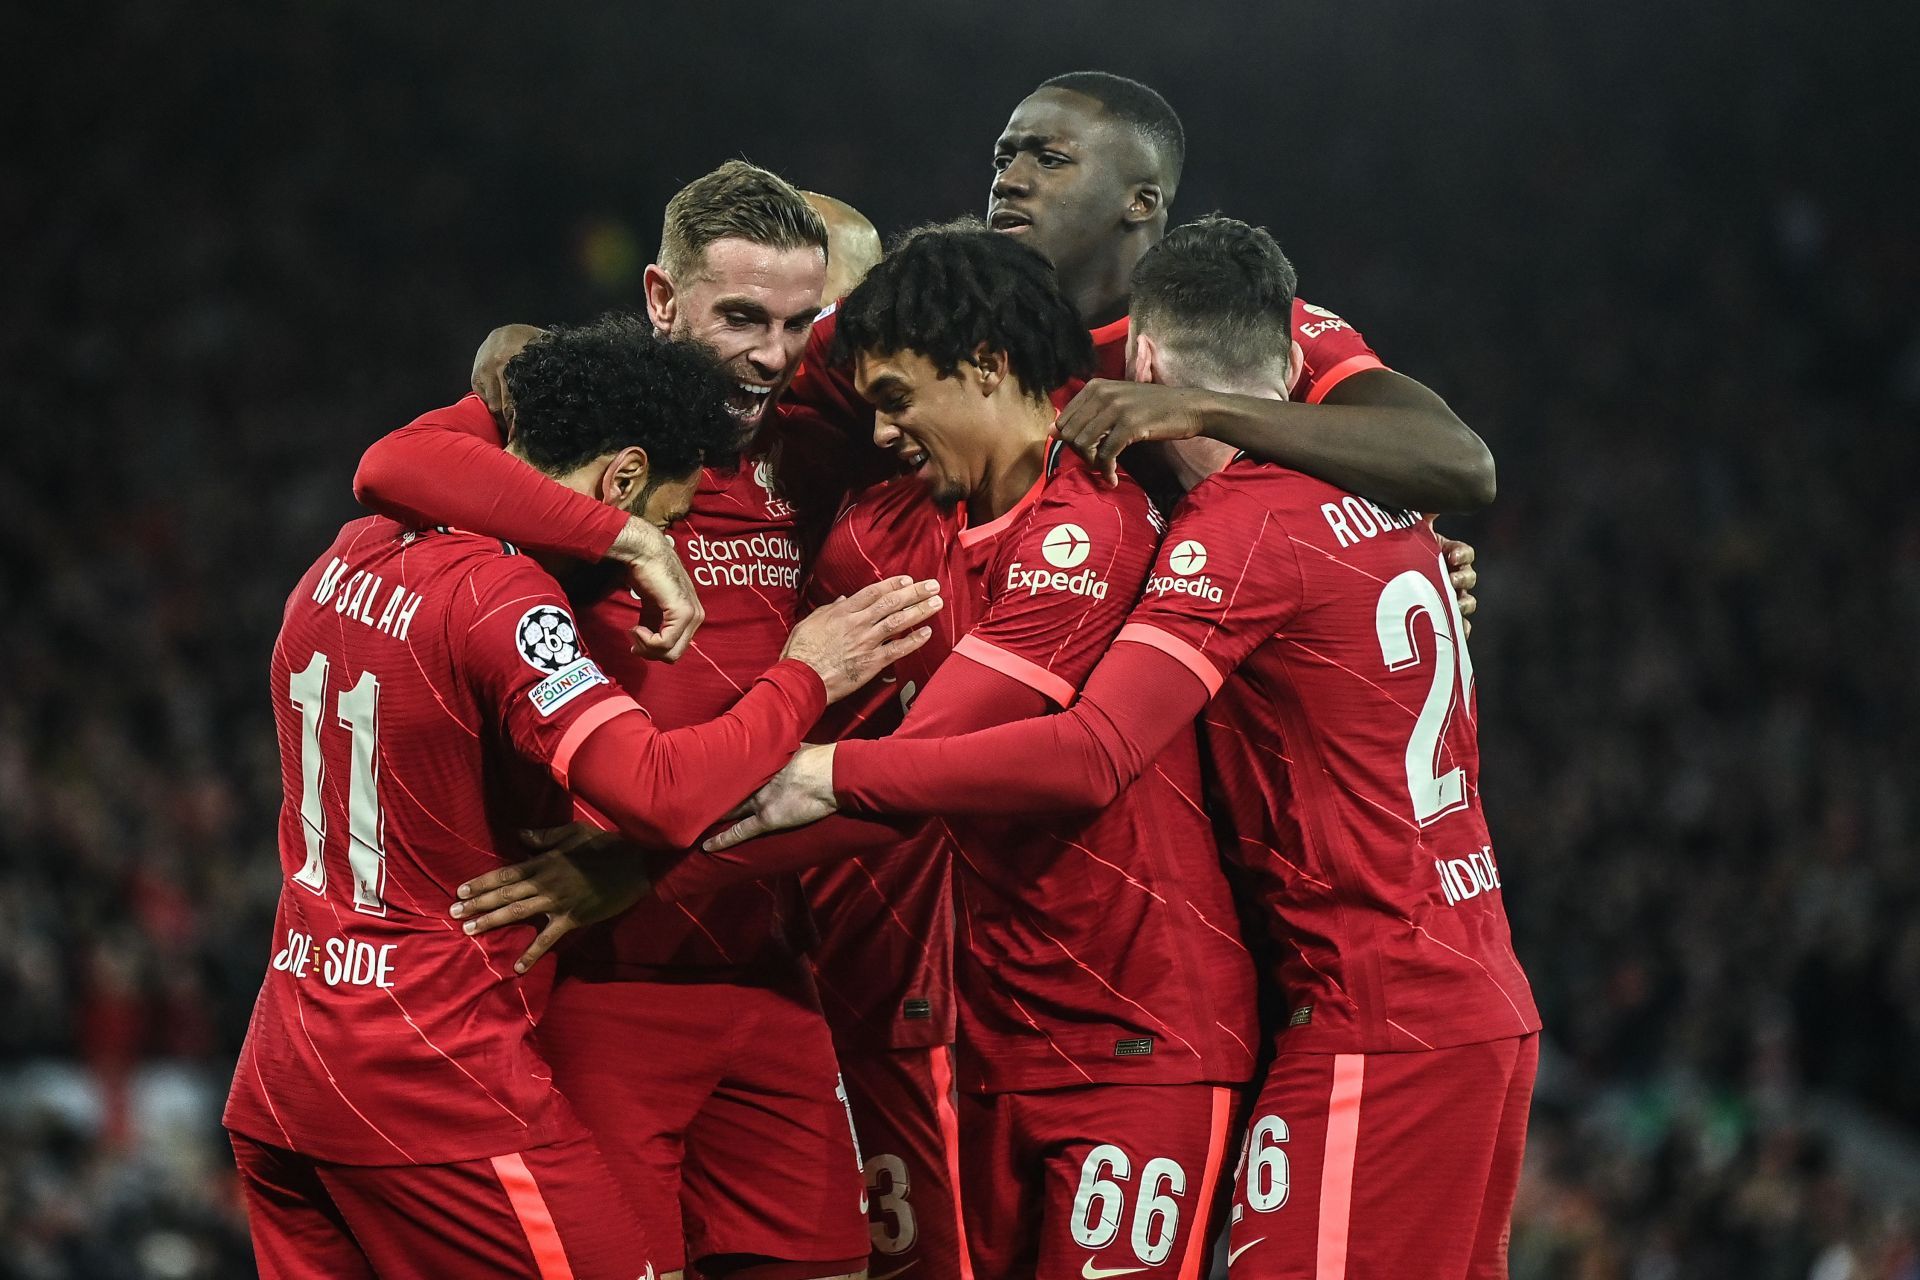 The Reds are in red-hot form